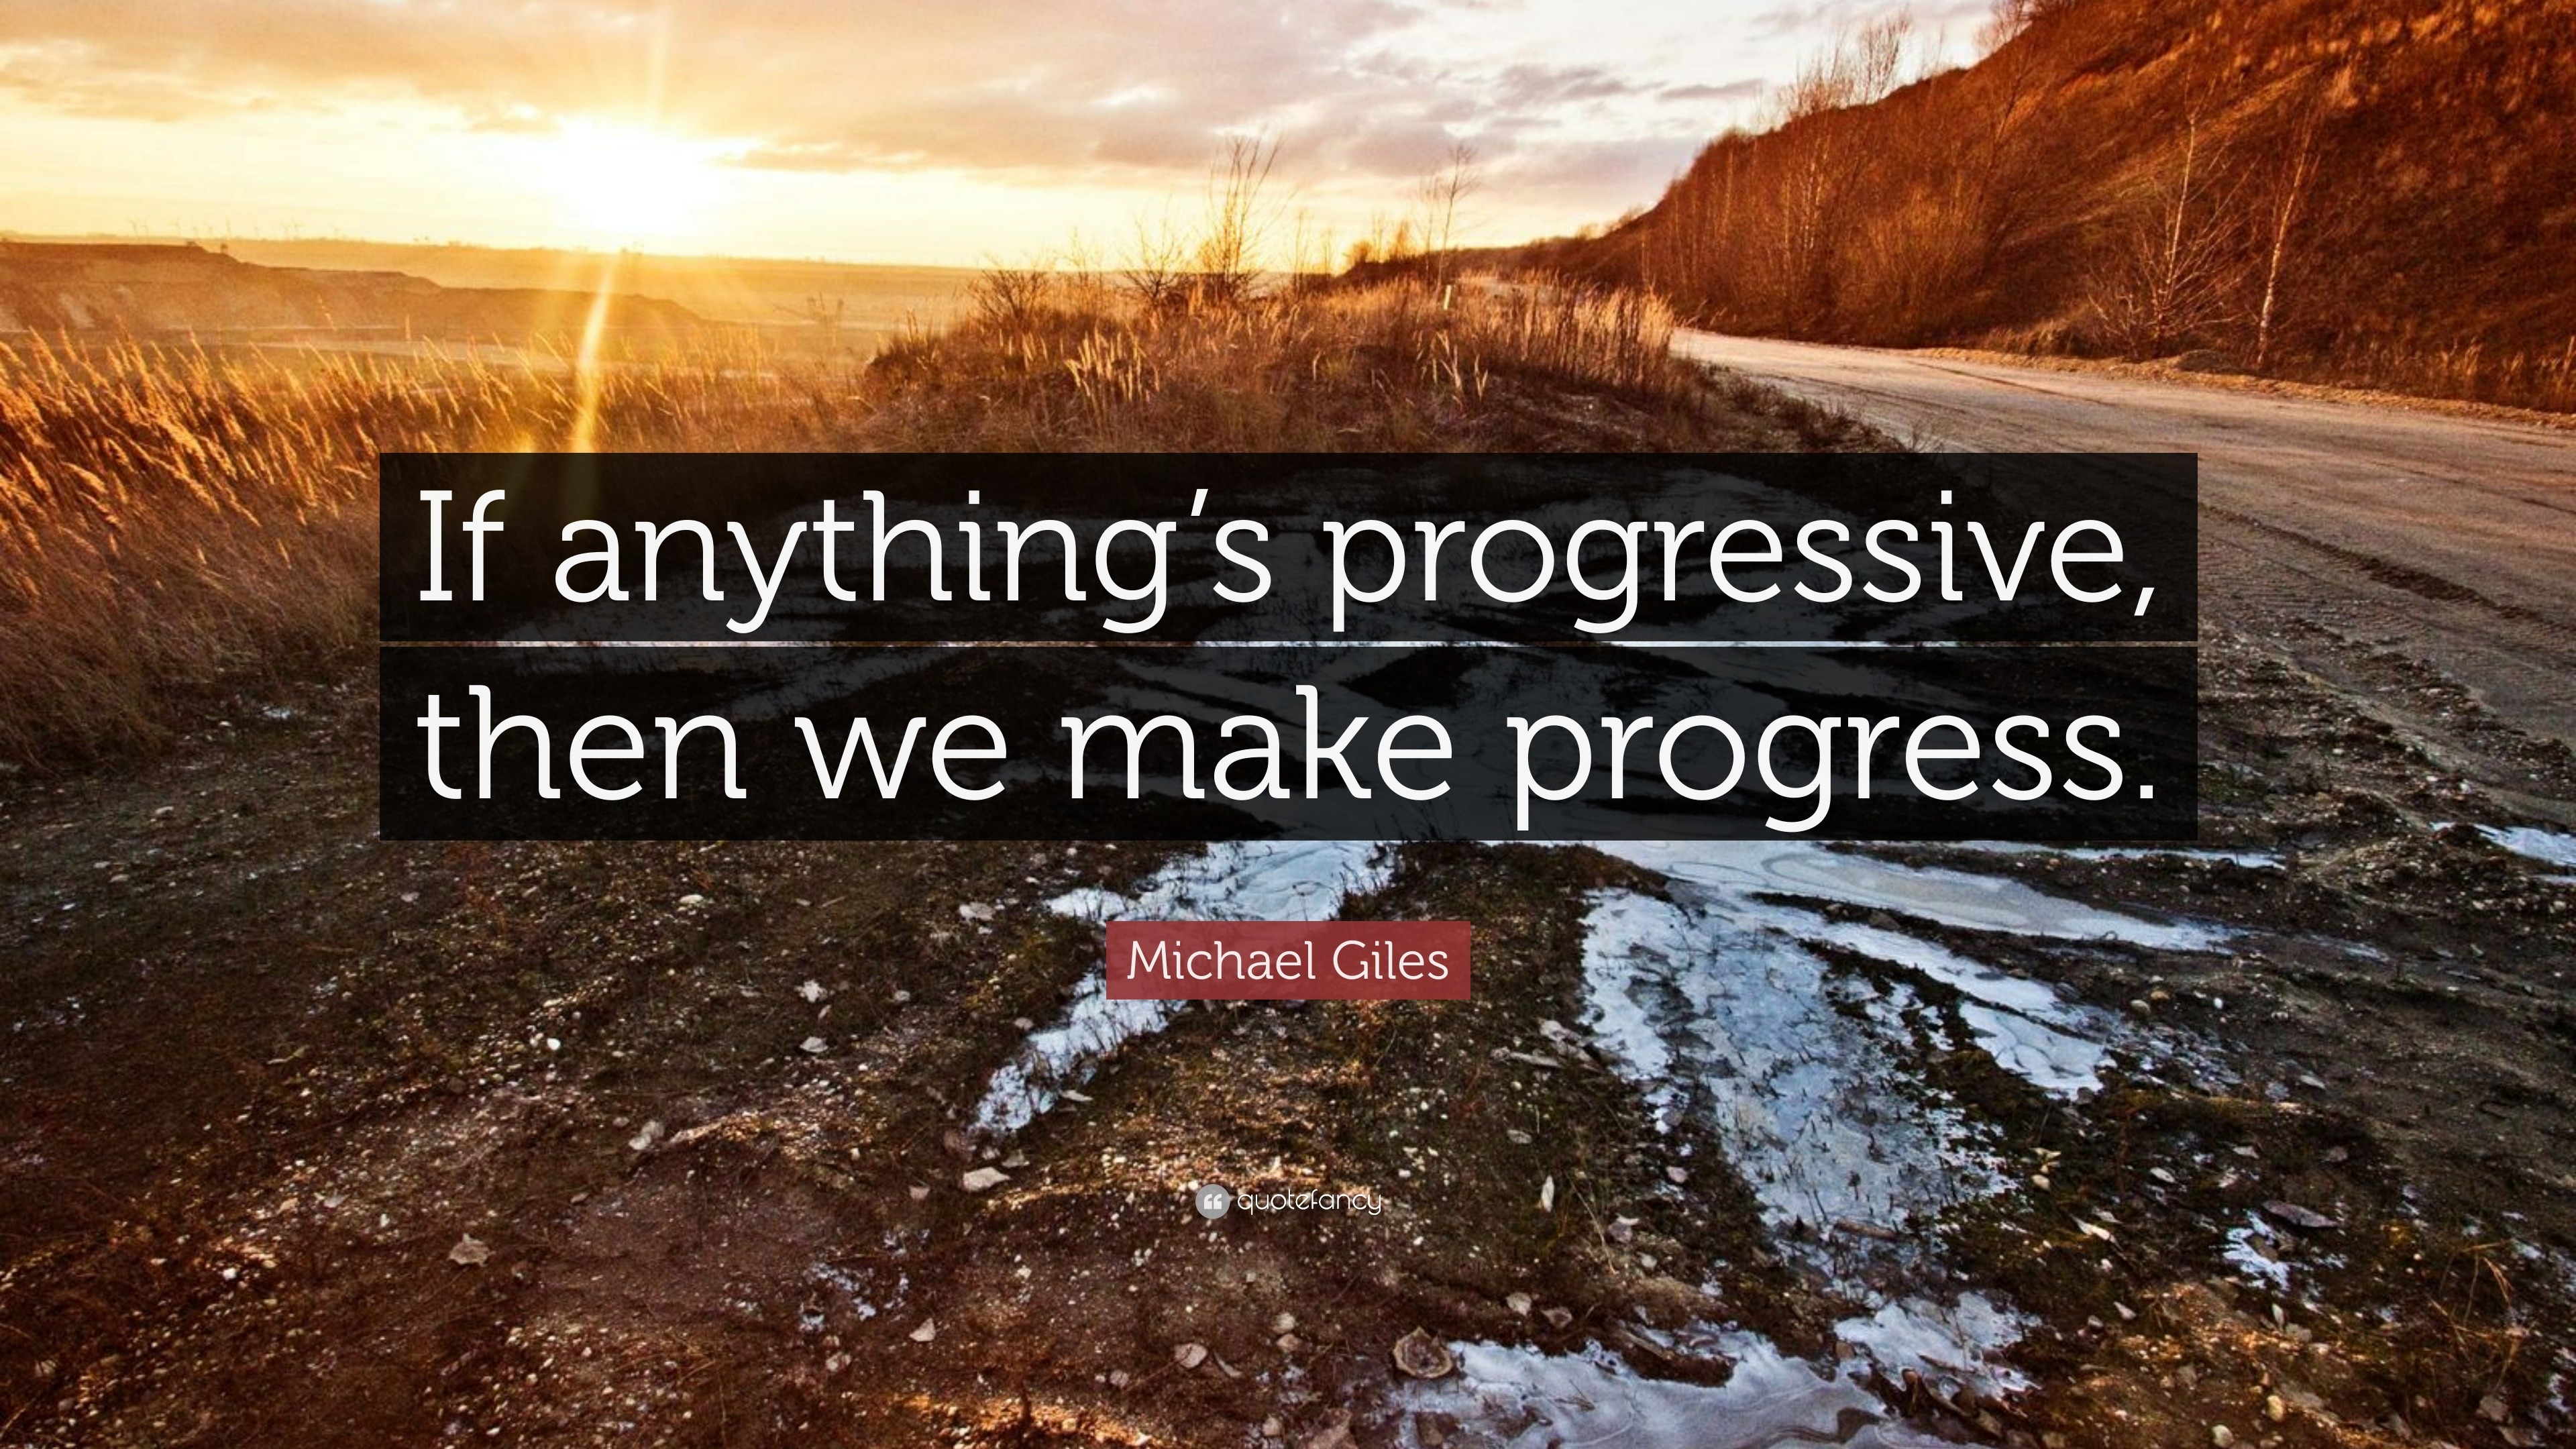 Michael Giles Quote: “If anything’s progressive, then we make progress.”